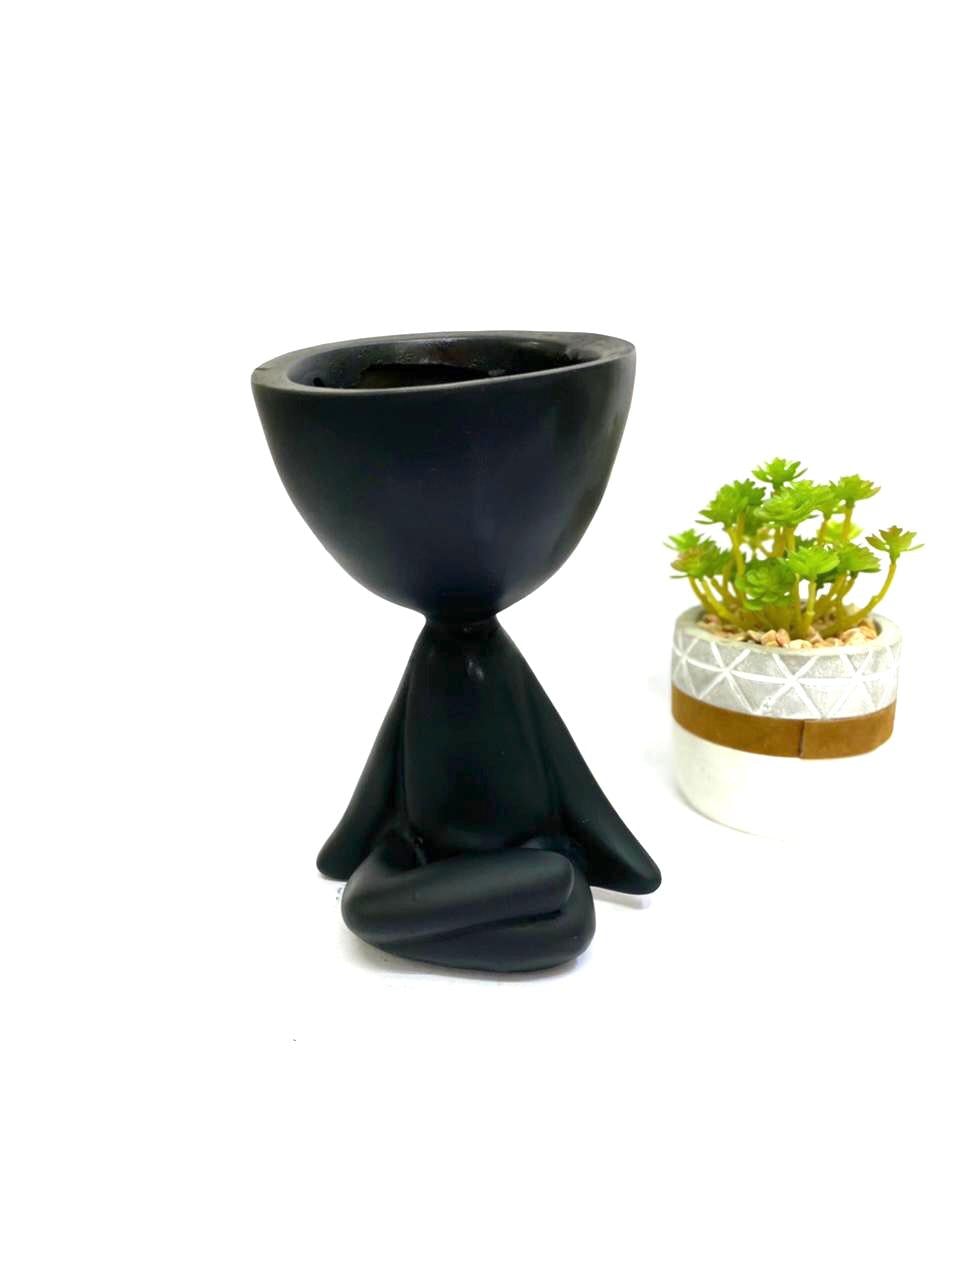 Adorable Planters Human Figures For Home Décor In Various Models Tamrapatra